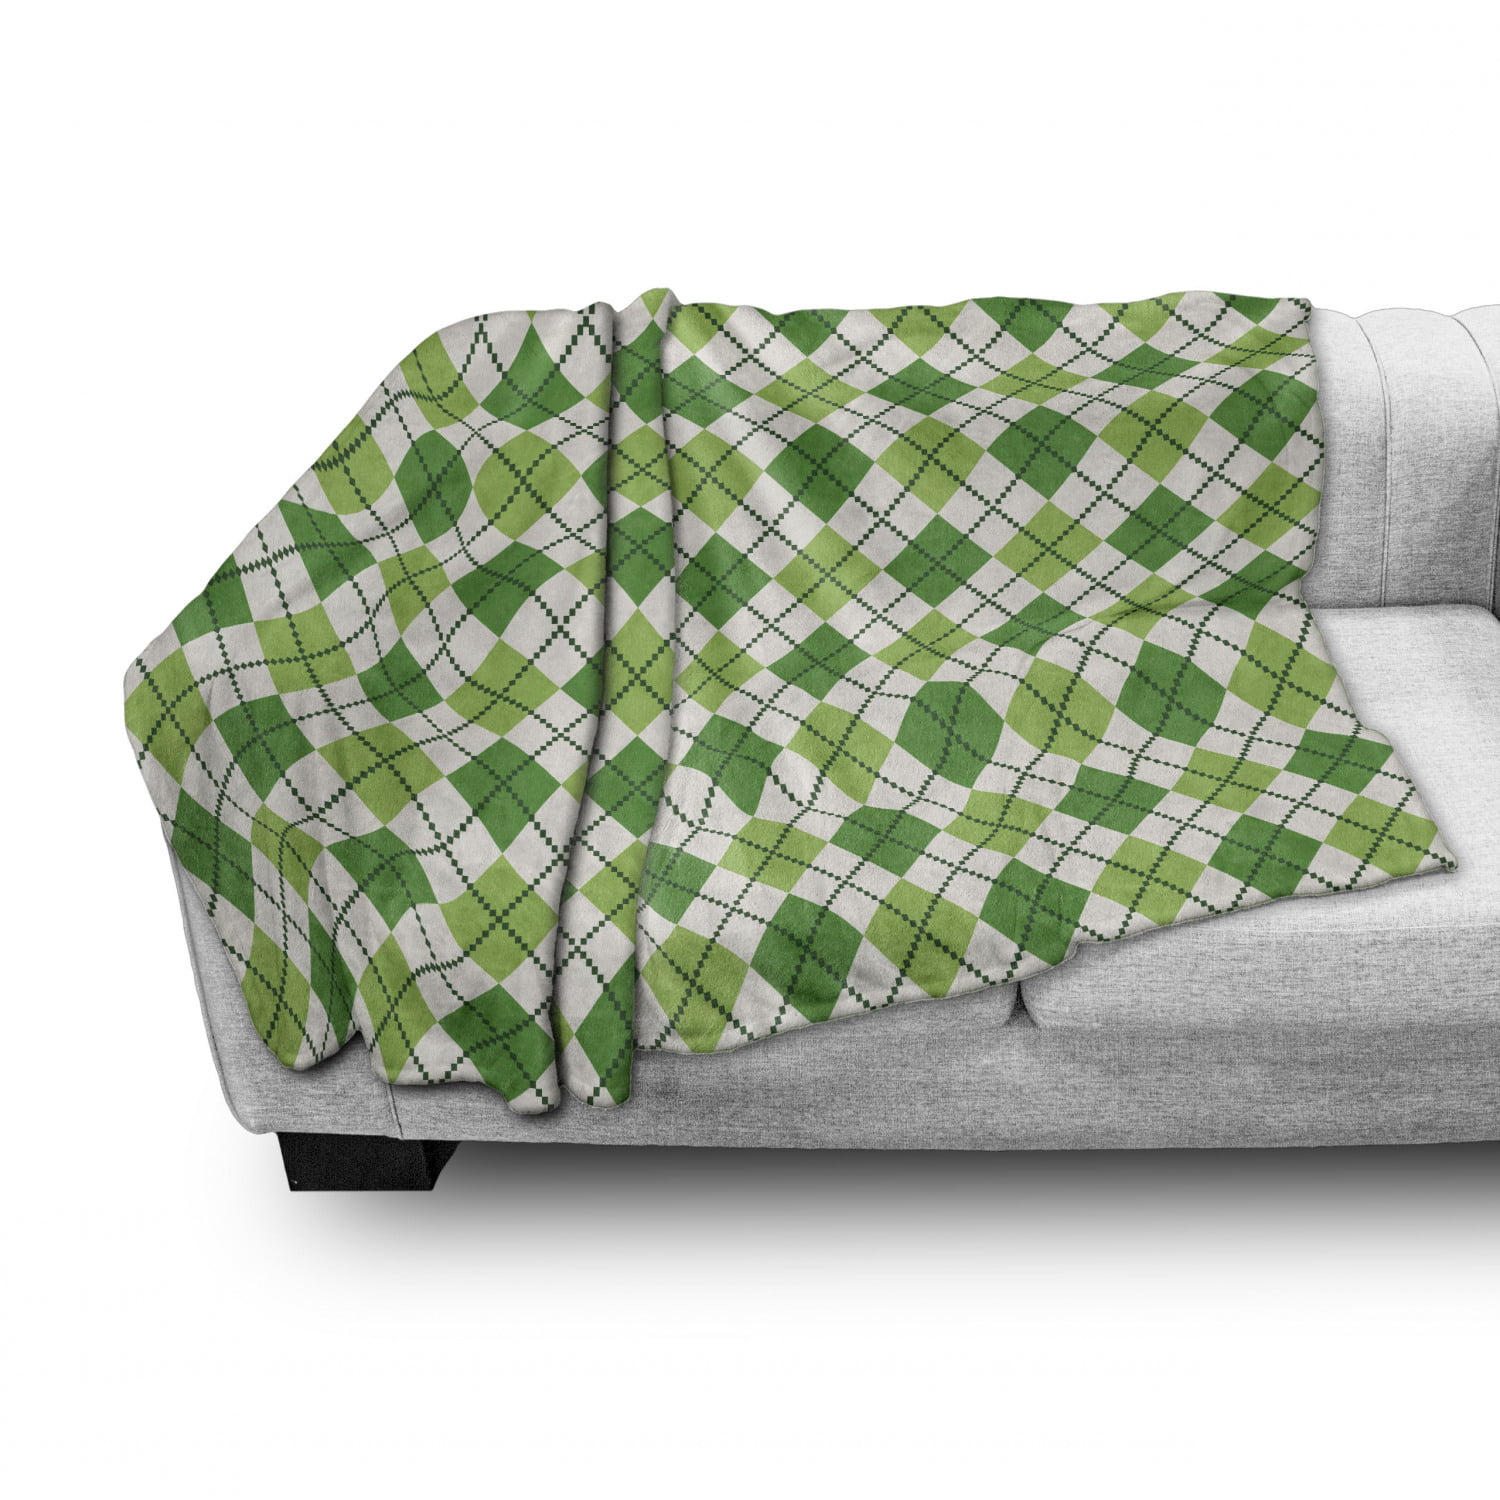 Irish Throw Blanket Classical Argyle Diamond Line Pattern with Crosswise Lines Old Fashioned Warm Microfiber All Season Blanket for Bed or Couch 50 x 30 inch Green Pale Green White 